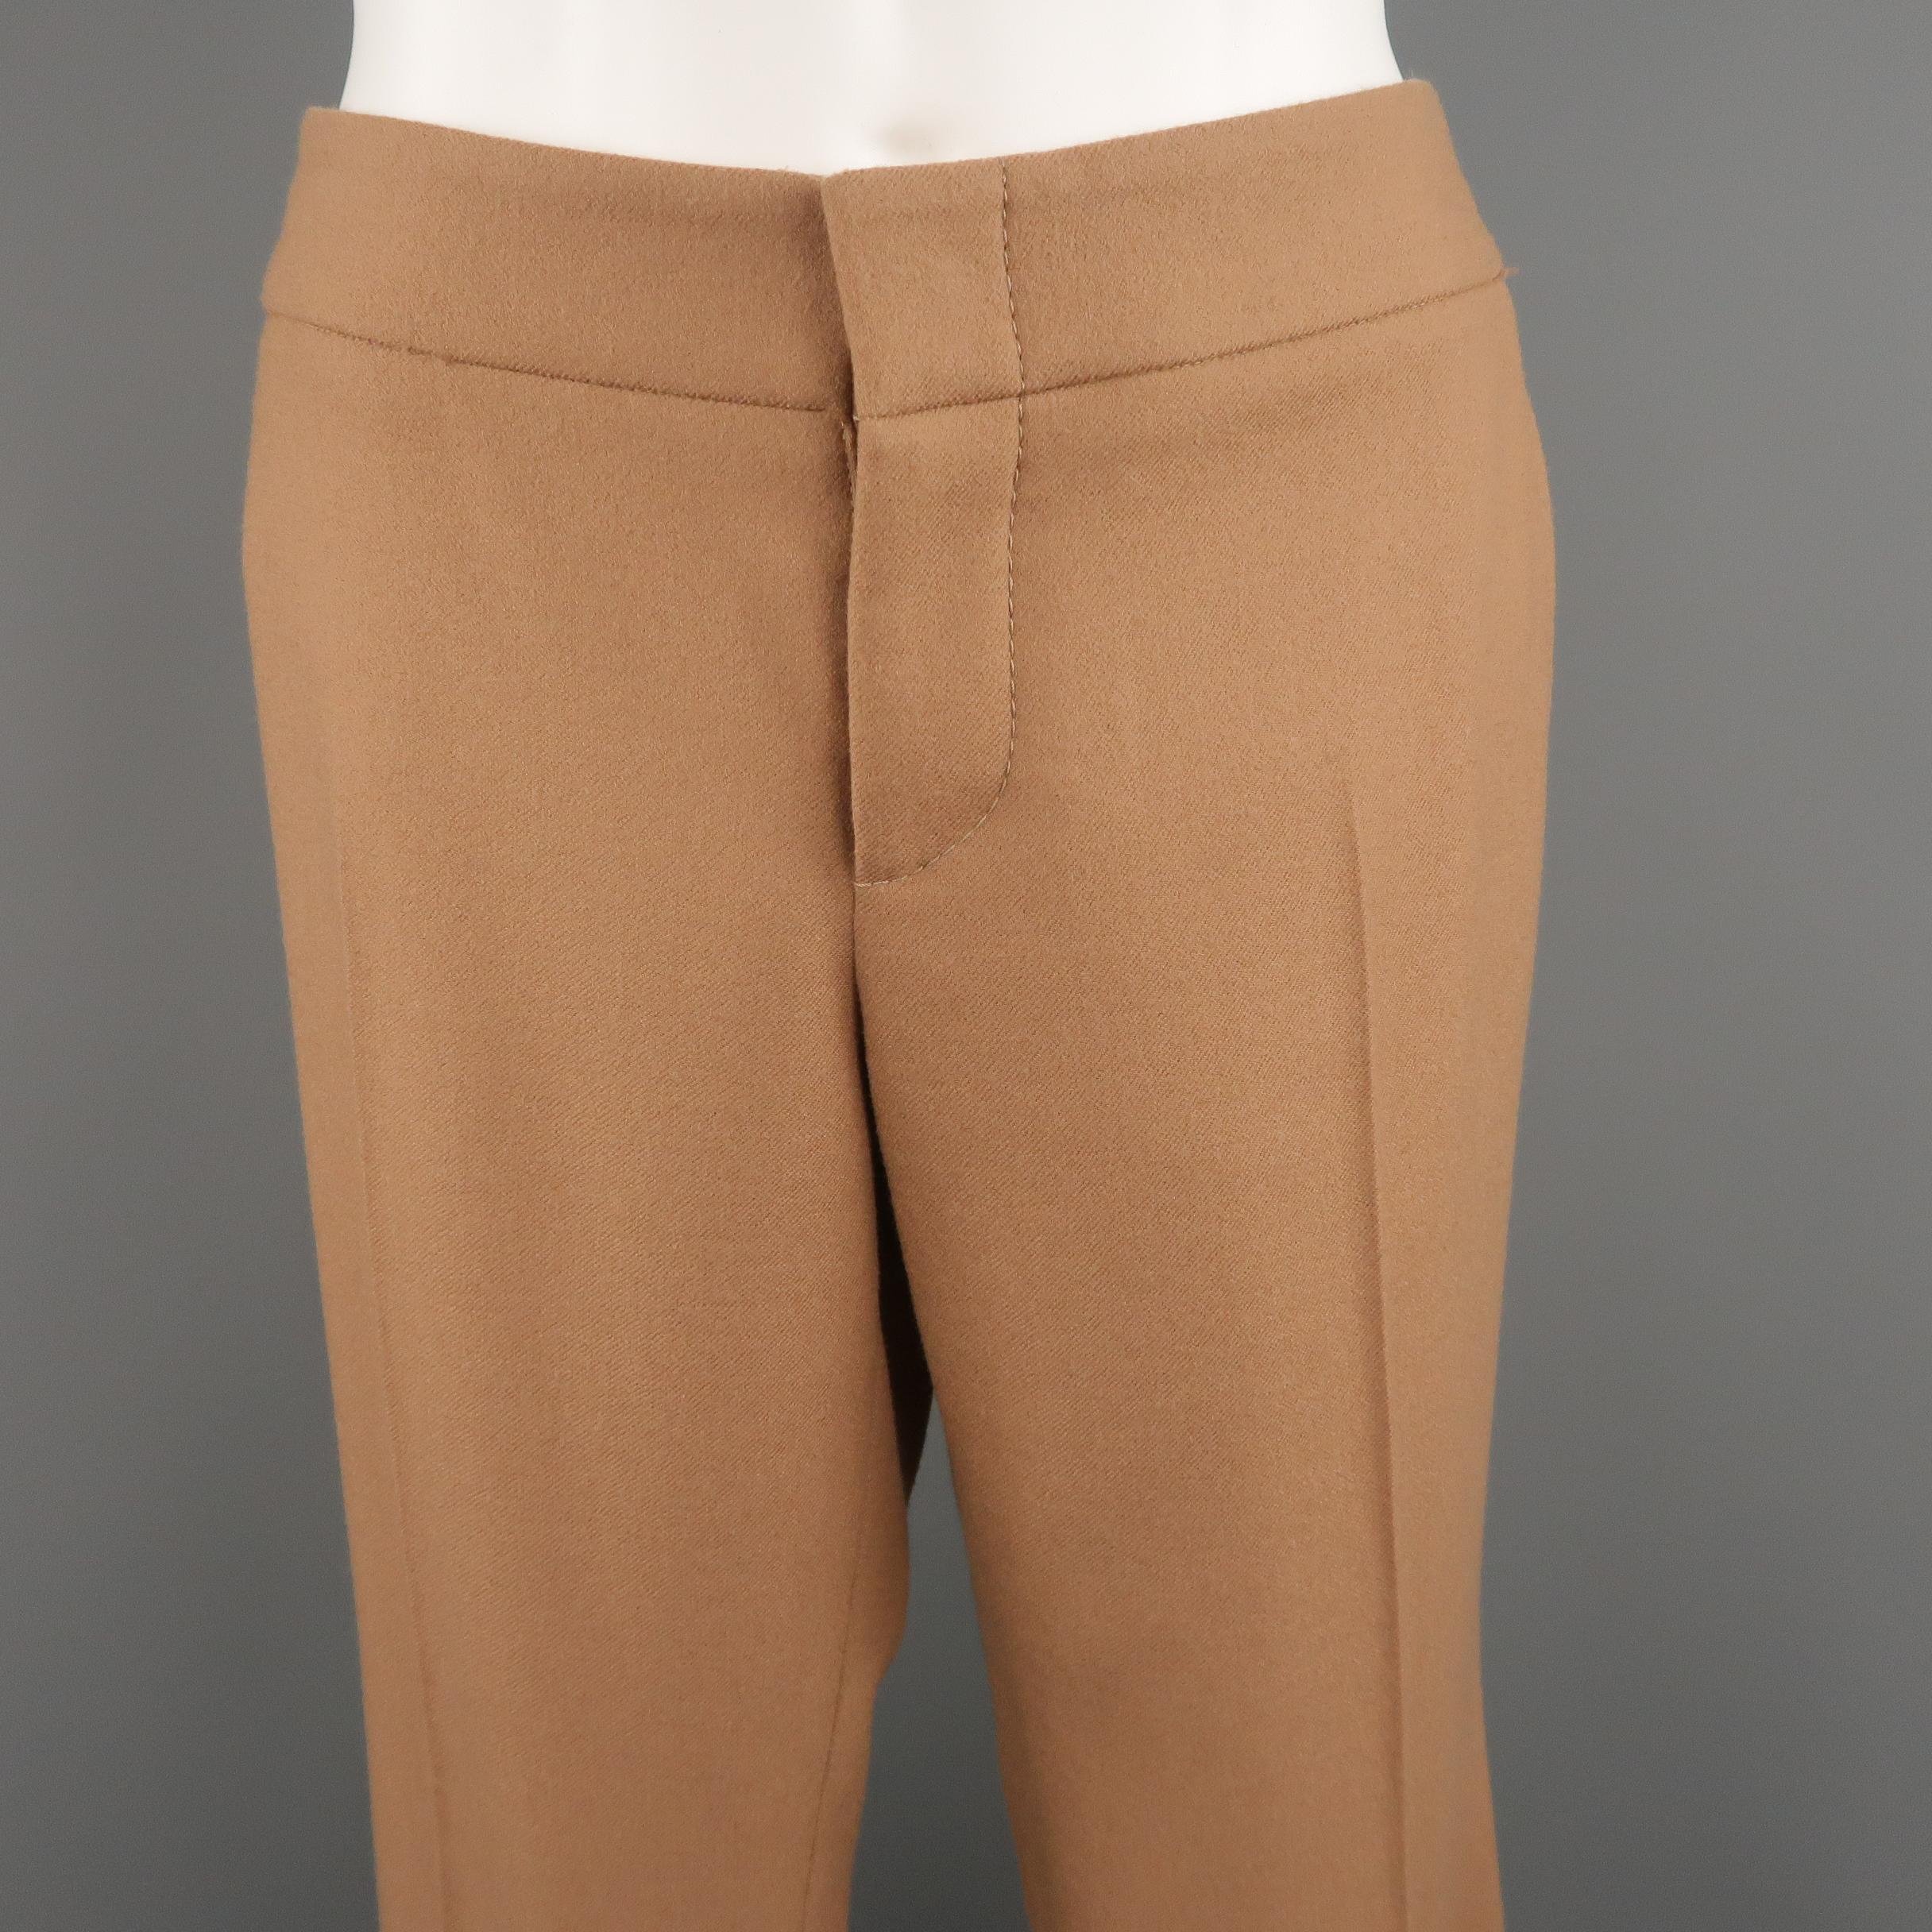 GUCCI dress pants come in camel khaki wool cashmere blend twill with a flat front, flared boot cut leg, and gold tone GG logo. Made in Italy.
 
New with Tags.
Marked: IT 42
 
Measurements:
 
Waist: 32 in.
Rise: 8 in.
Inseam:  37 in.